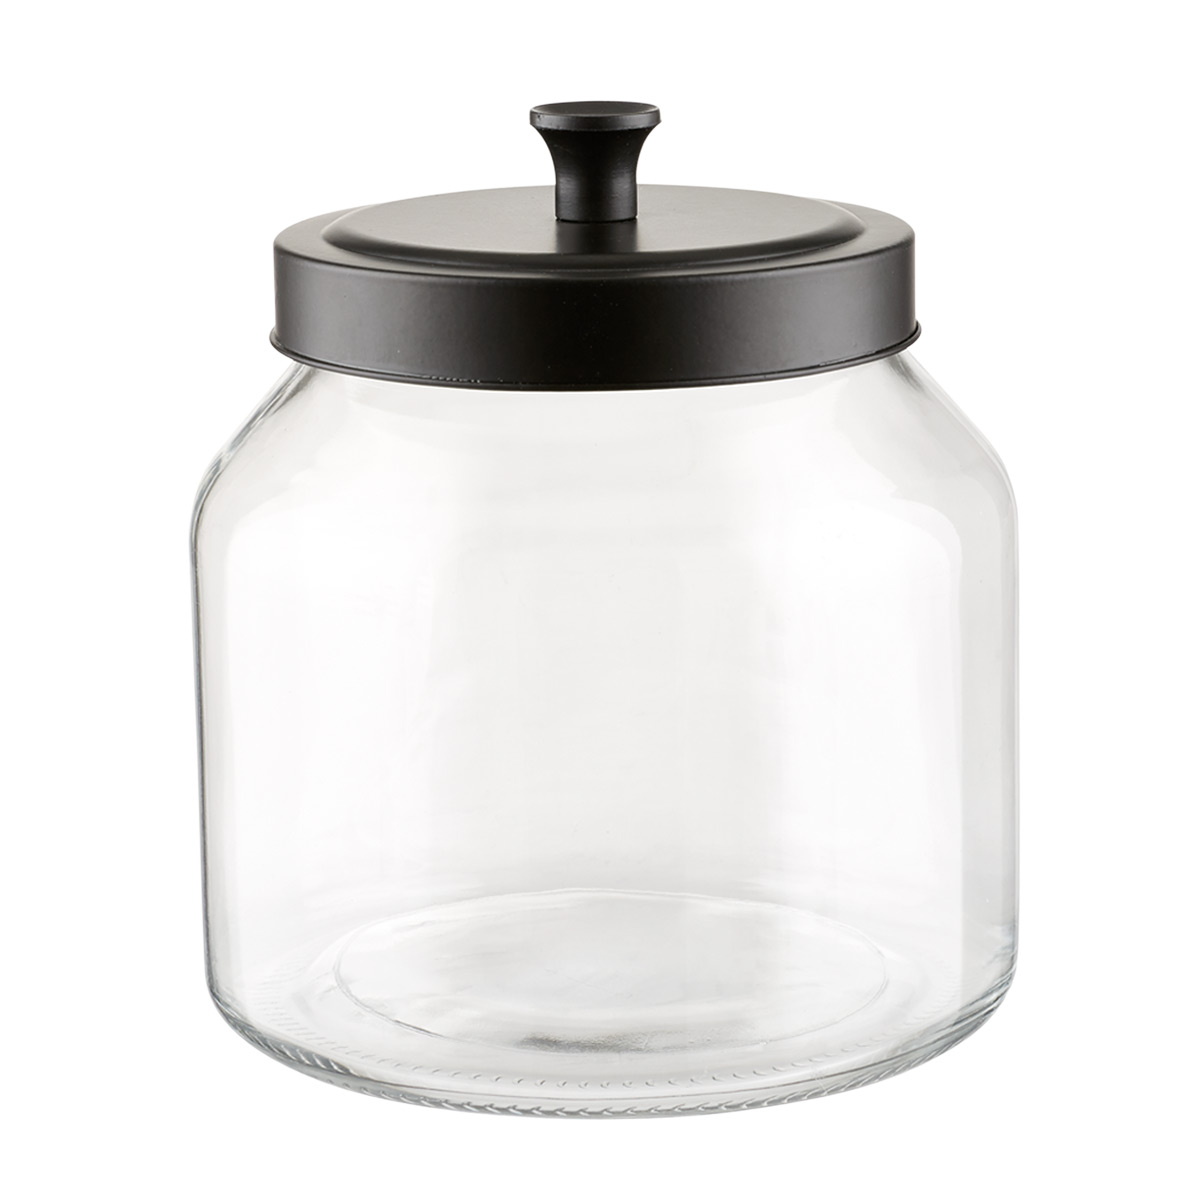 https://www.containerstore.com/catalogimages/345088/10074986-glass-canister-black-matte-.jpg